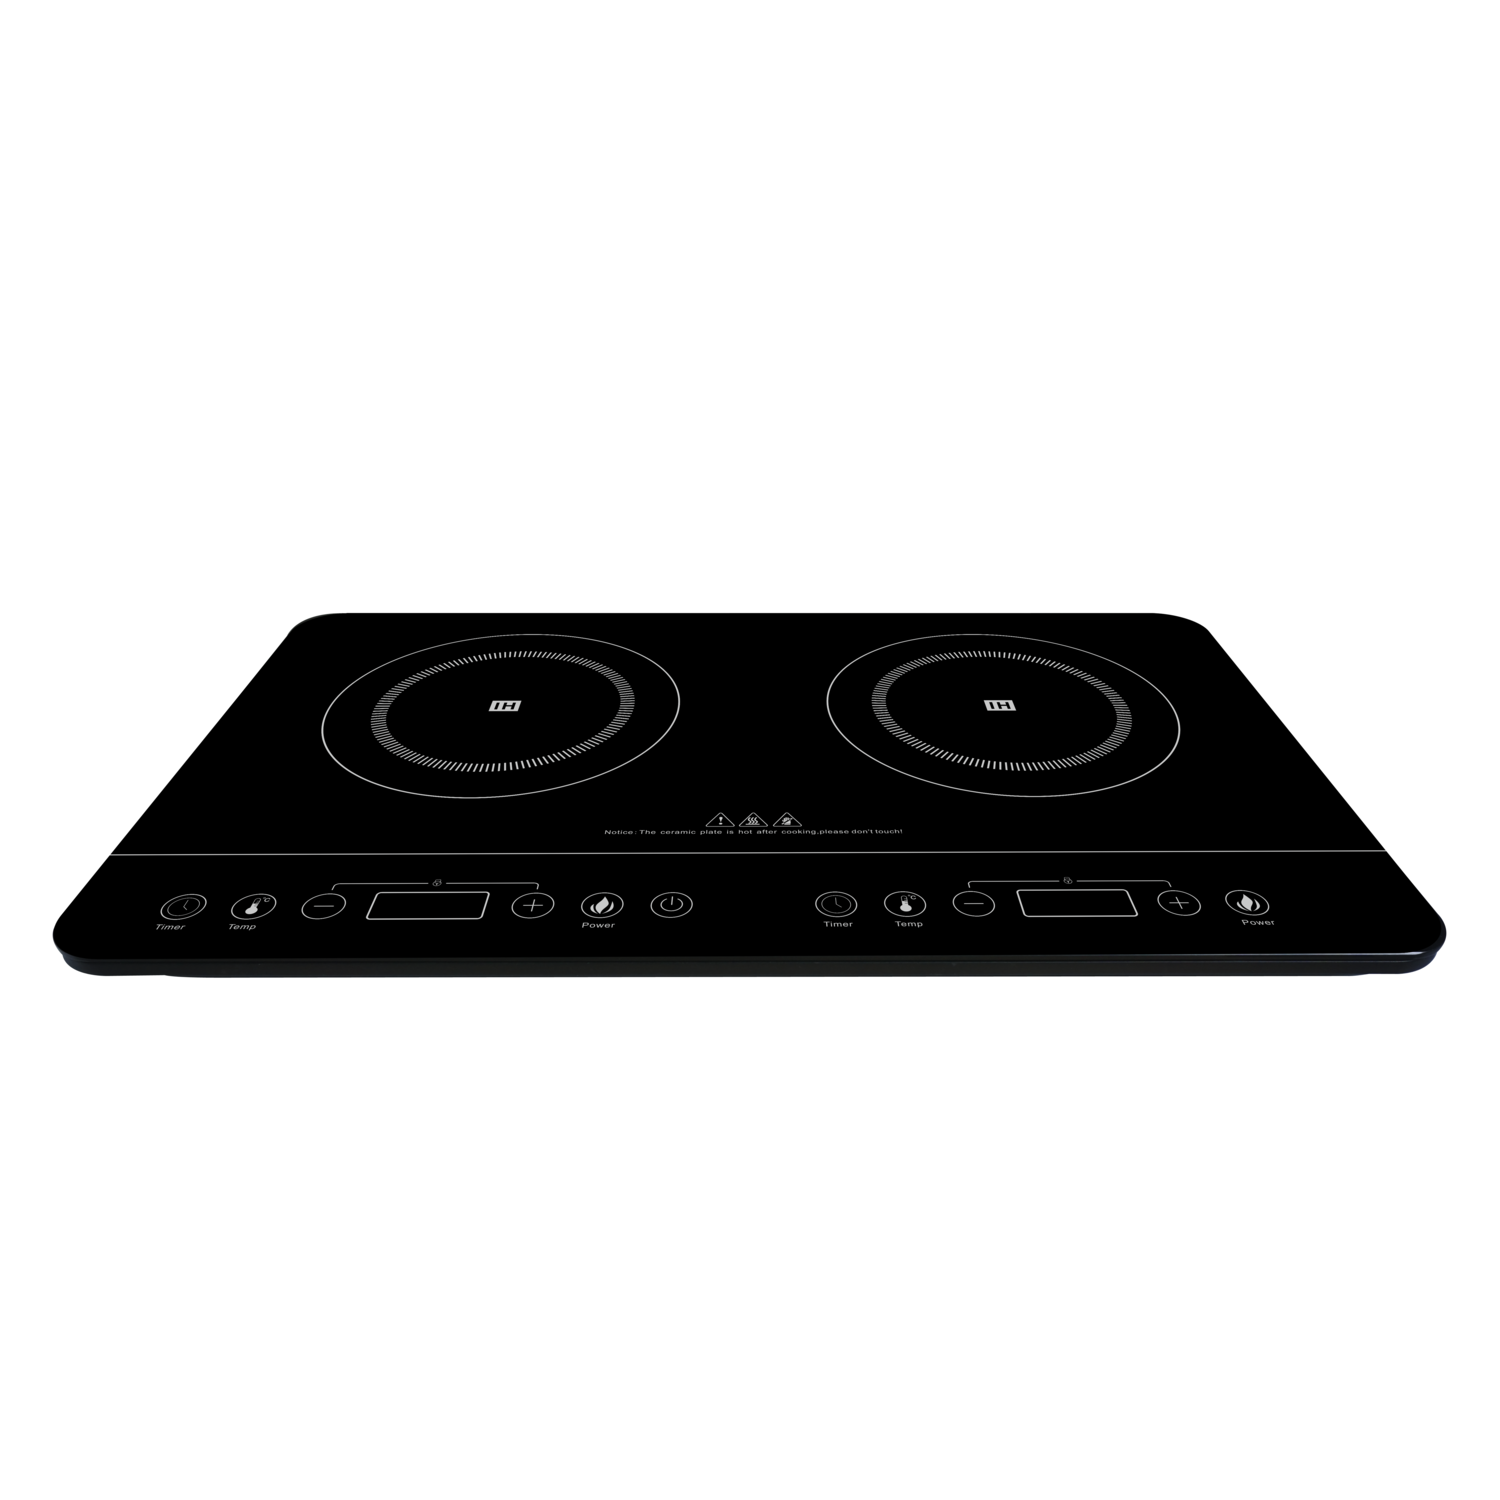 Twin Zone Digital Portable Induction Hob Table Top Hot Plate - Black